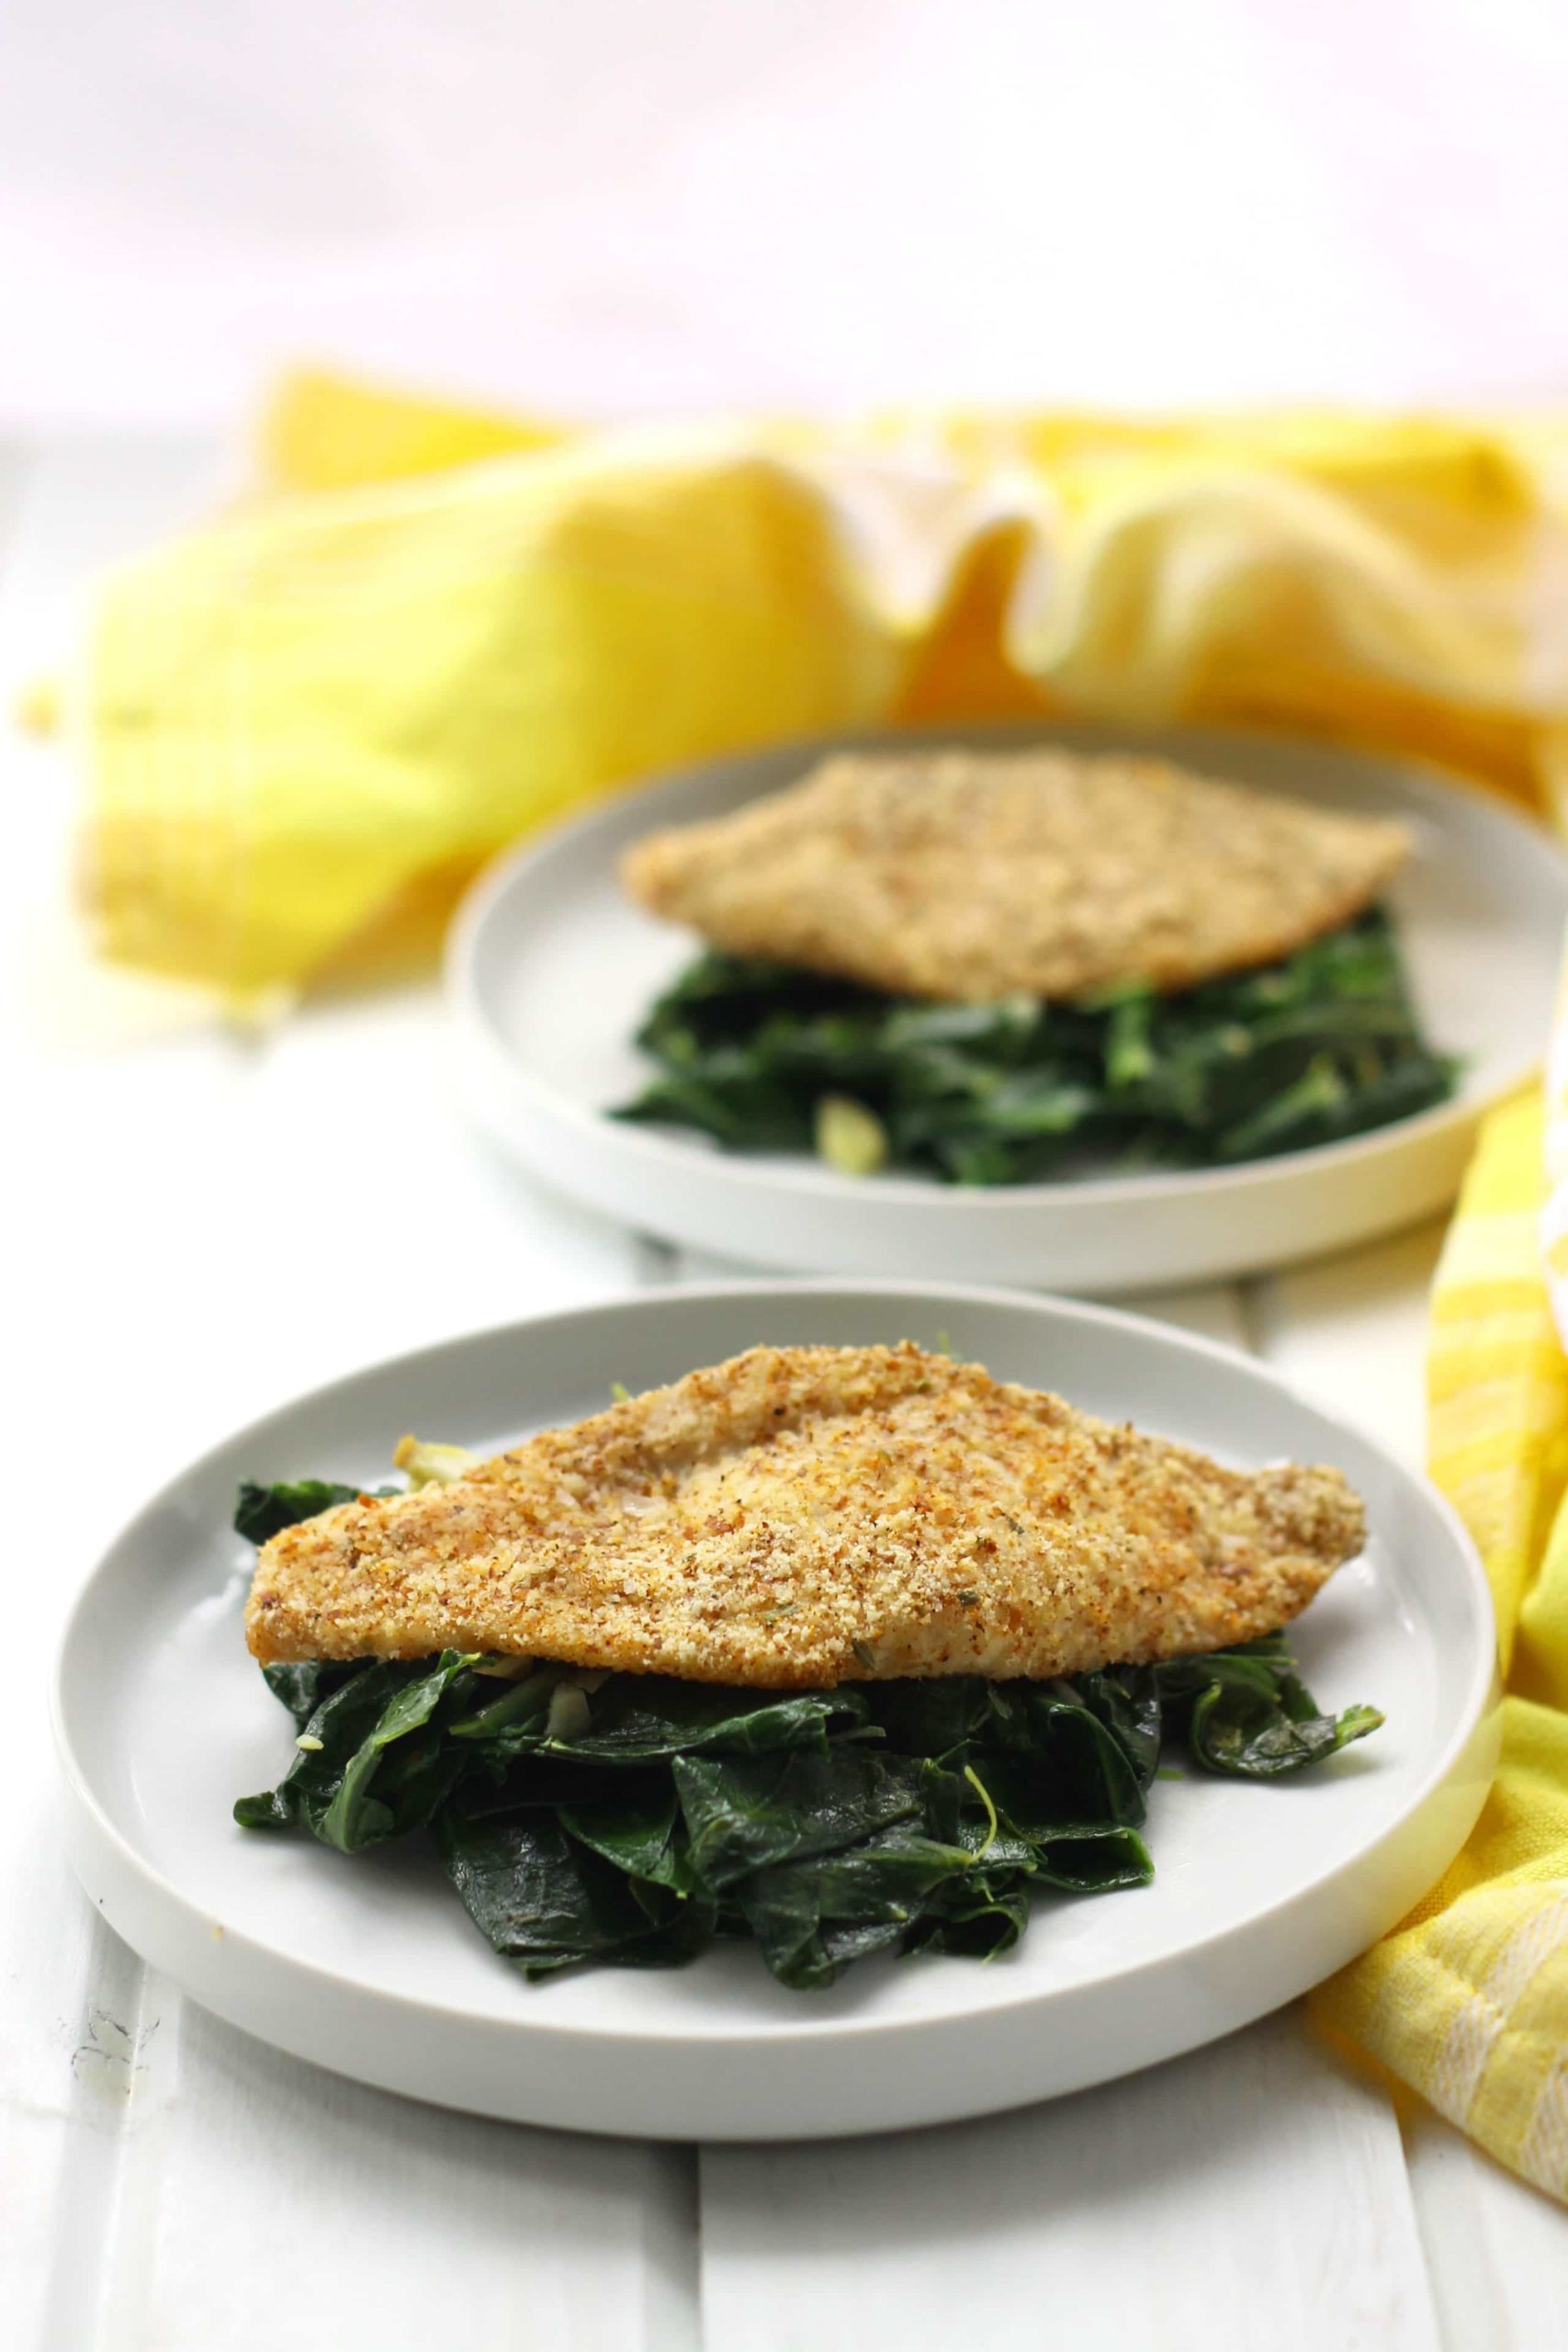 How to Make Oven Baked Catfish - Cornmeal Crusted!